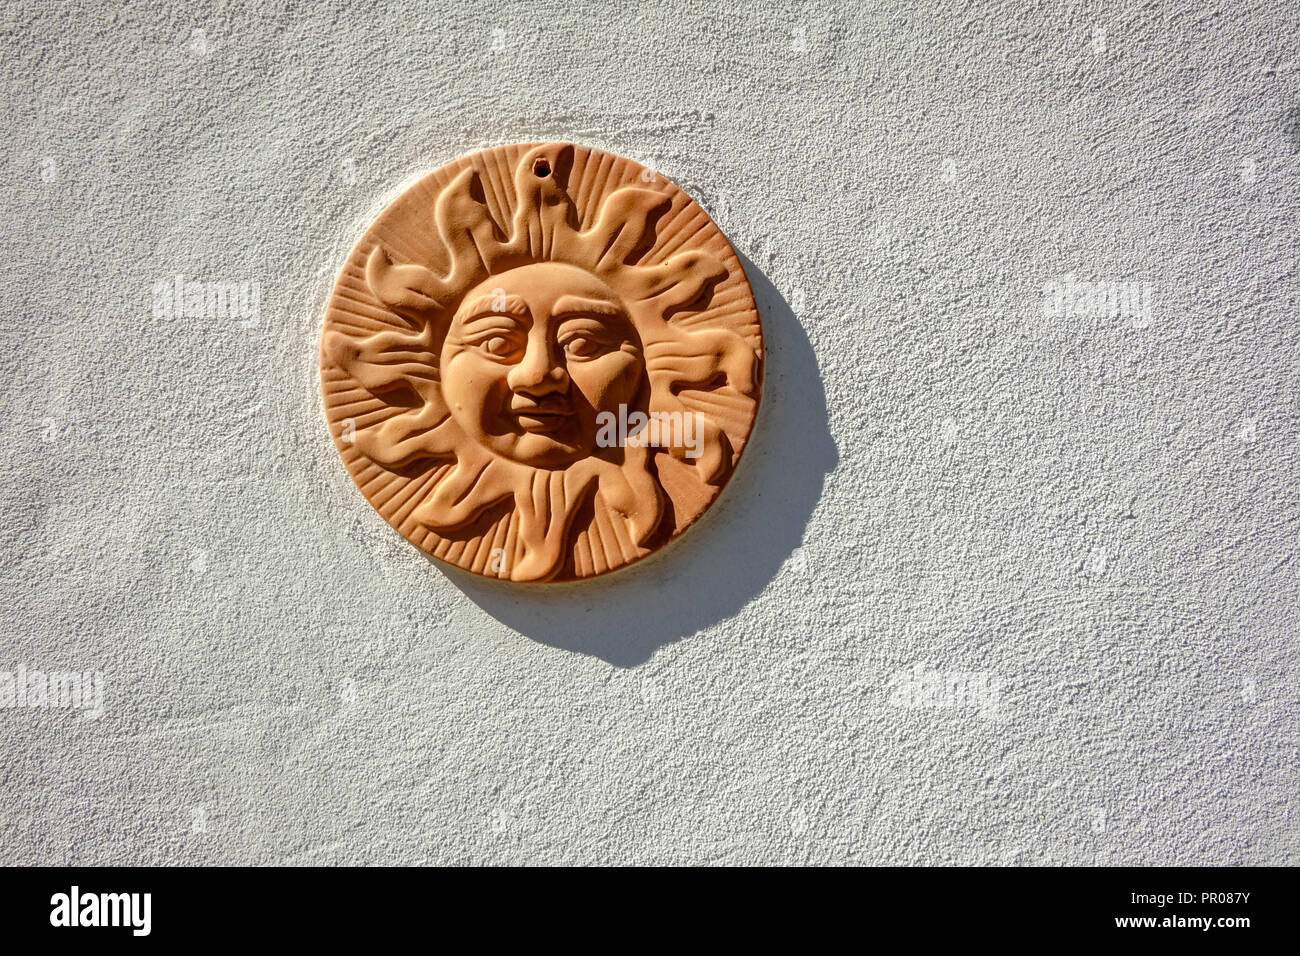 Looking at a round, hand-made clay art object depicting the sun. It hangs on a white stone wall in the Swiss village of Lauterbrunnen (Bernese Alps) Stock Photo